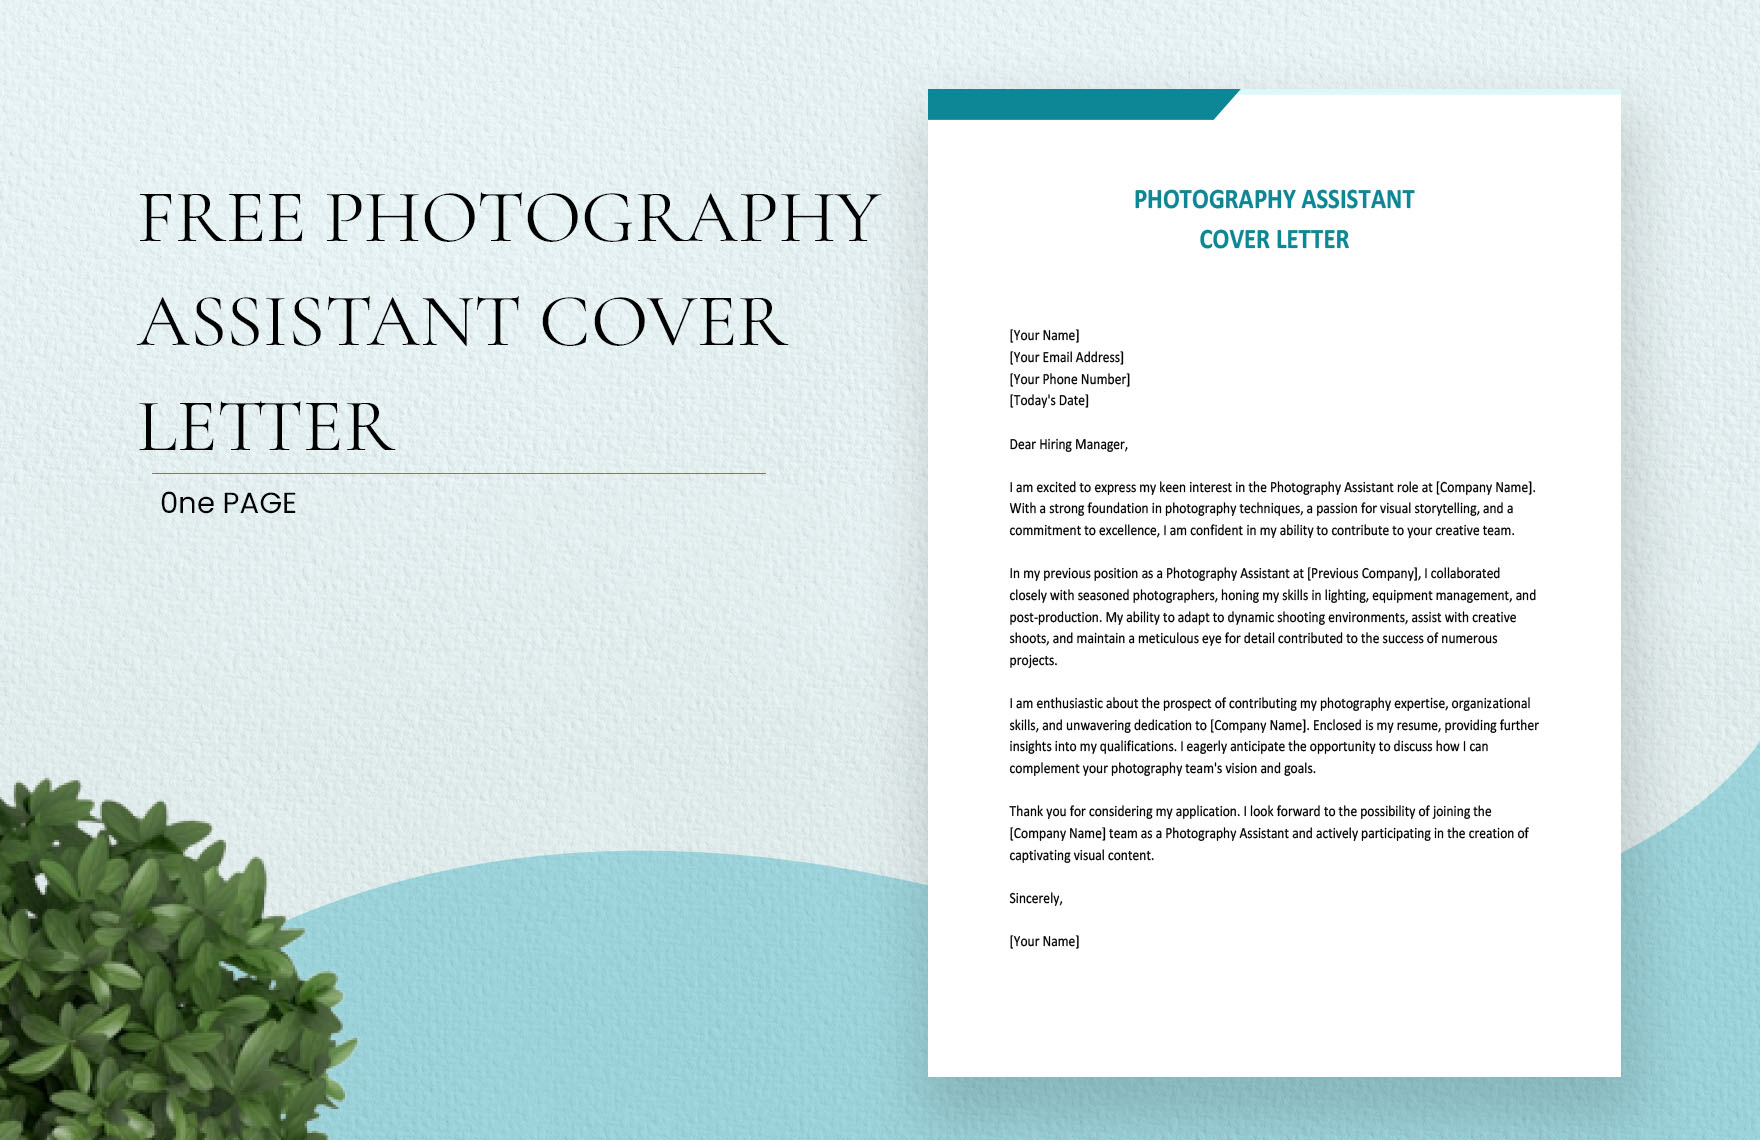 Photography Assistant Cover Letter in Word, Google Docs